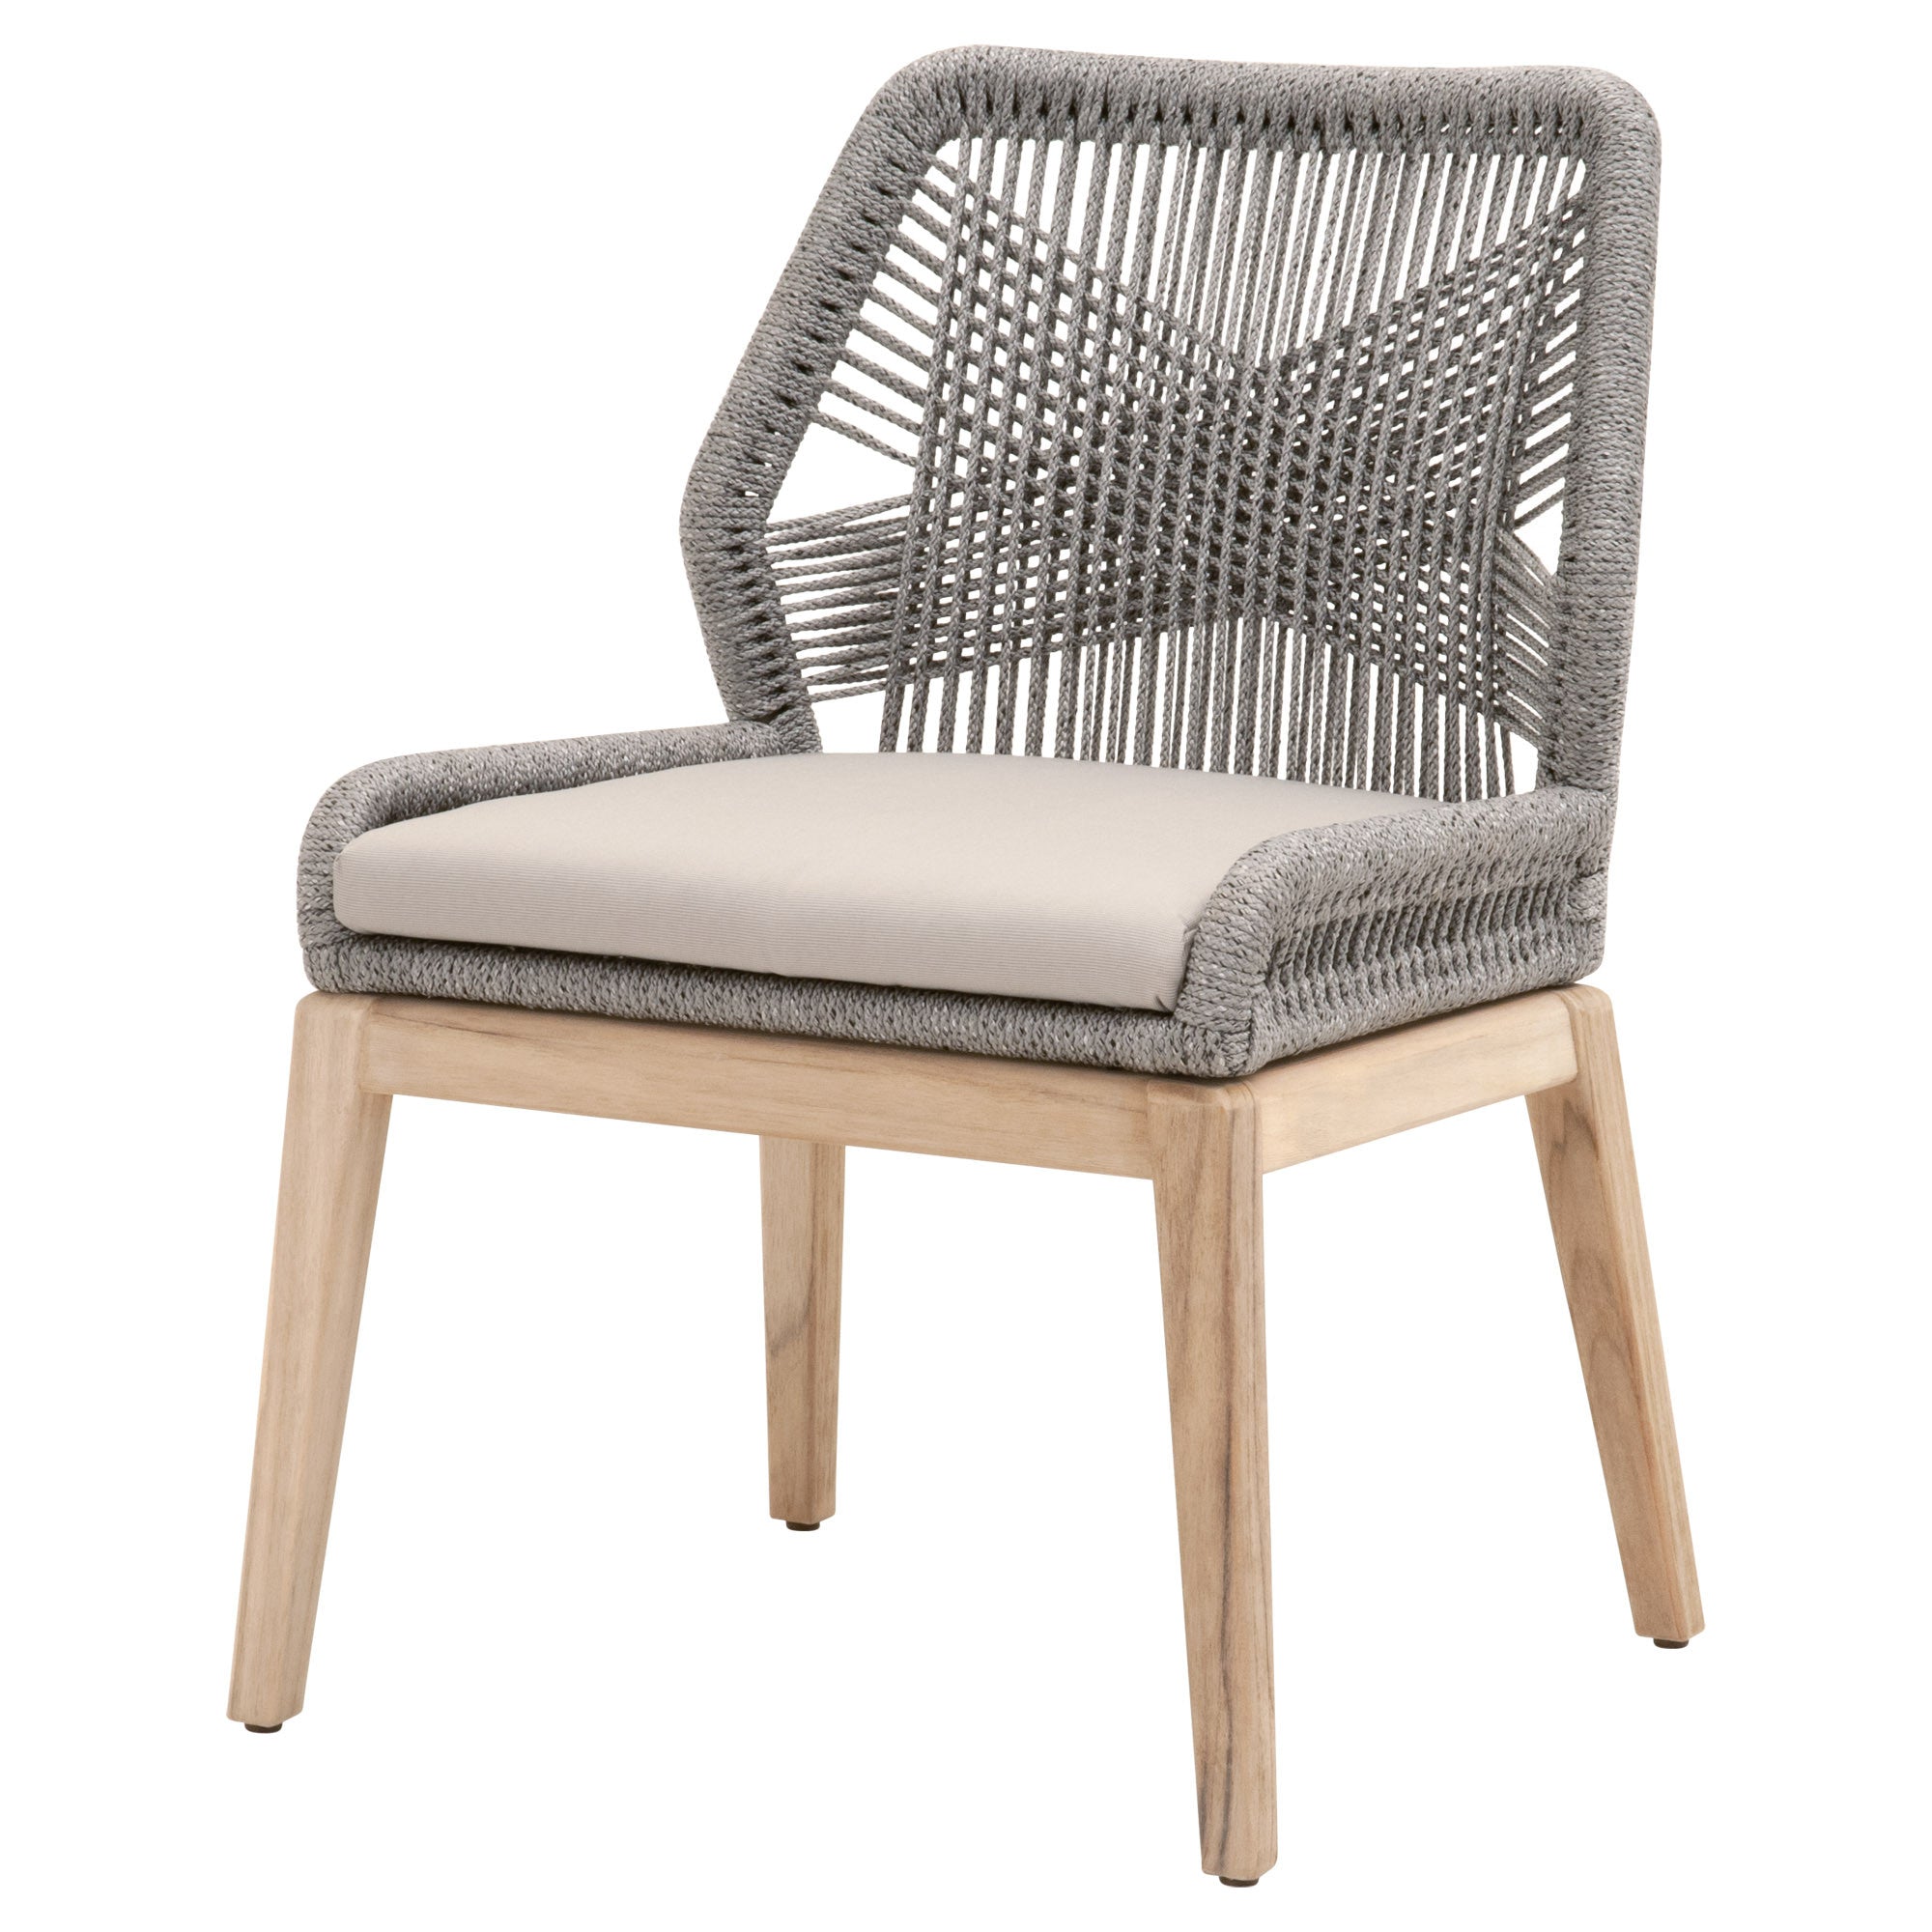 26" Set Of Two Platinum And Natural Solid Wood Dining Chair With Gray Cushion - Tuesday Morning-Outdoor Chairs